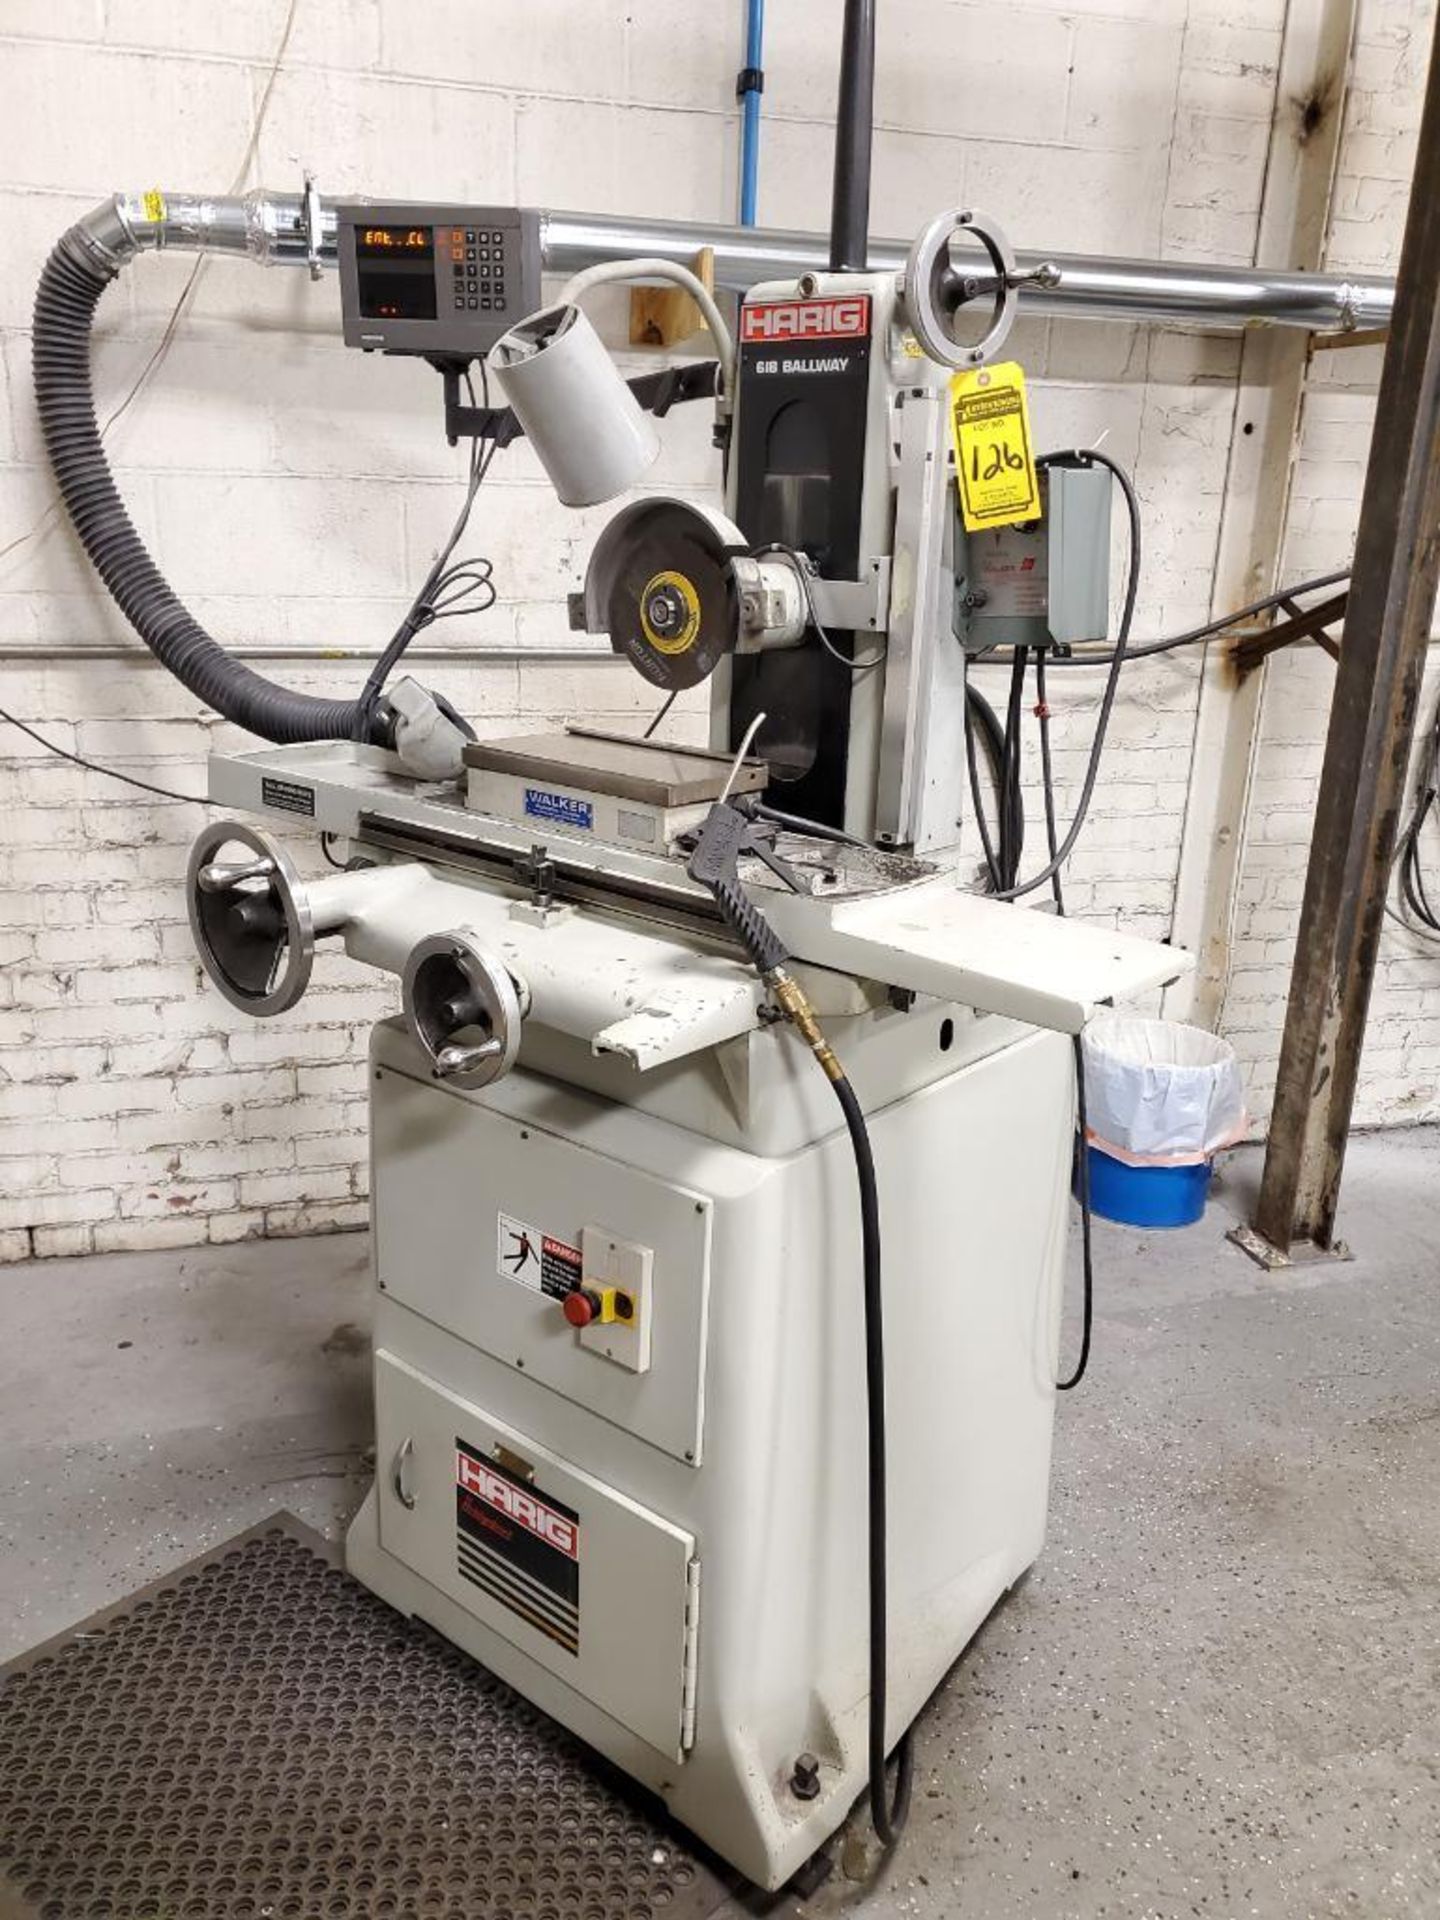 Harig 618 Ballway Automatic Surface Grinder, Heidenhain 2-Axis DRO Control, Walker 12" X 6" PMC, Lig - Image 3 of 7